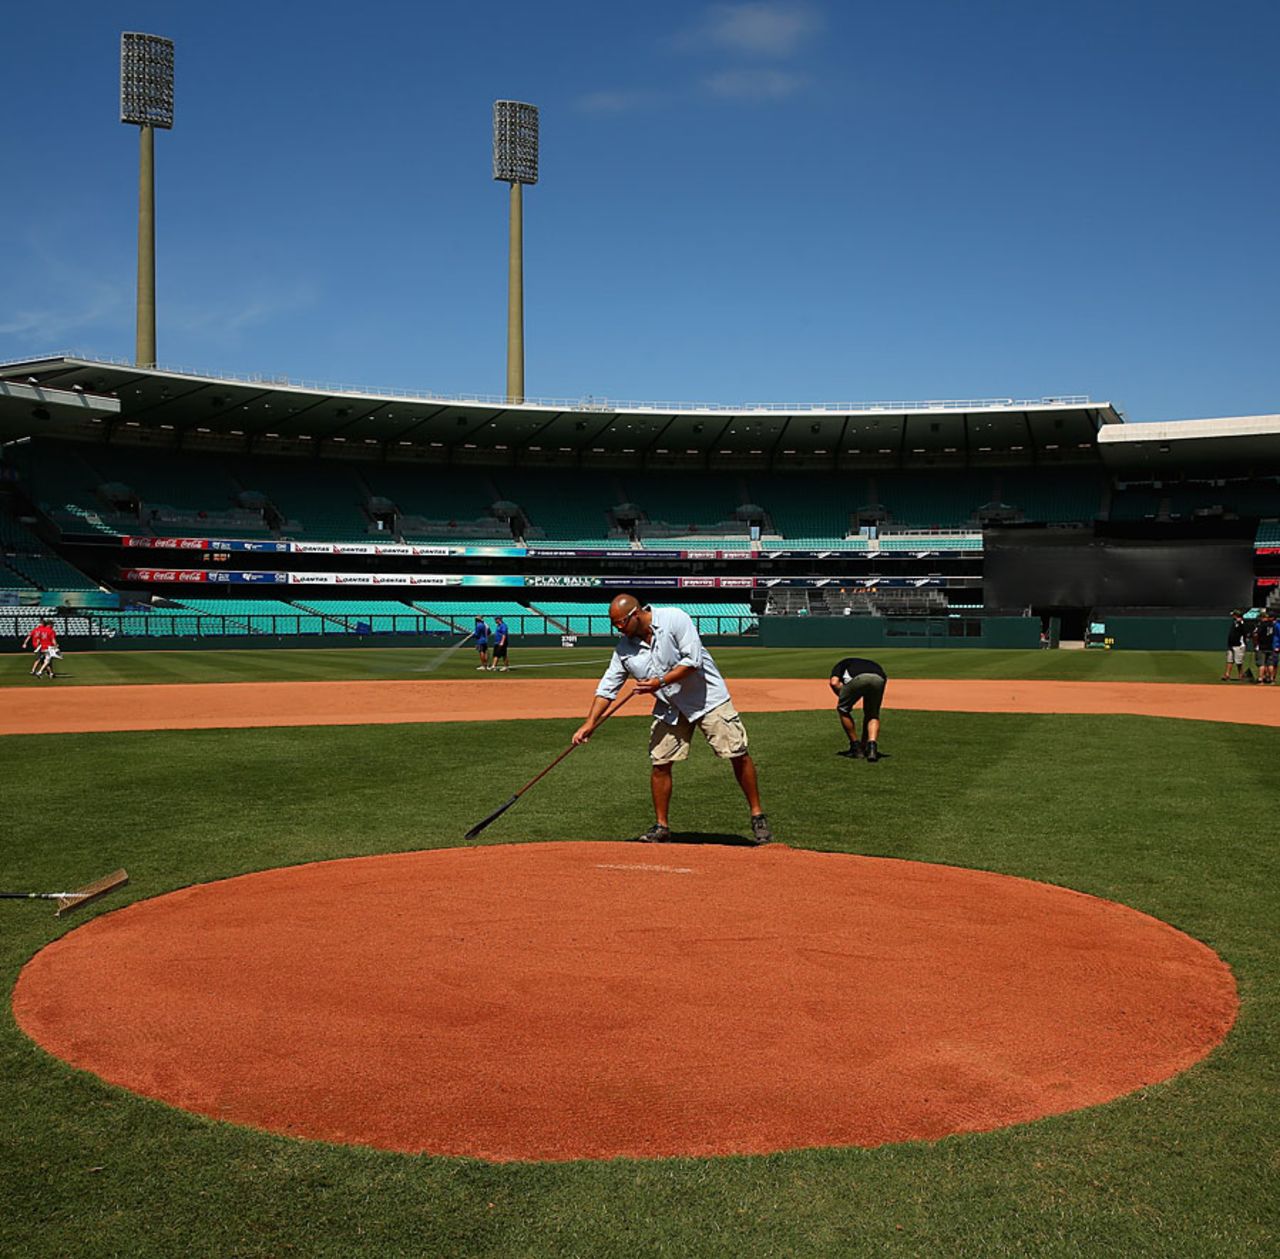 The SCG is prepared ahead of hosting an MLB game, Sydney, March 19, 2014